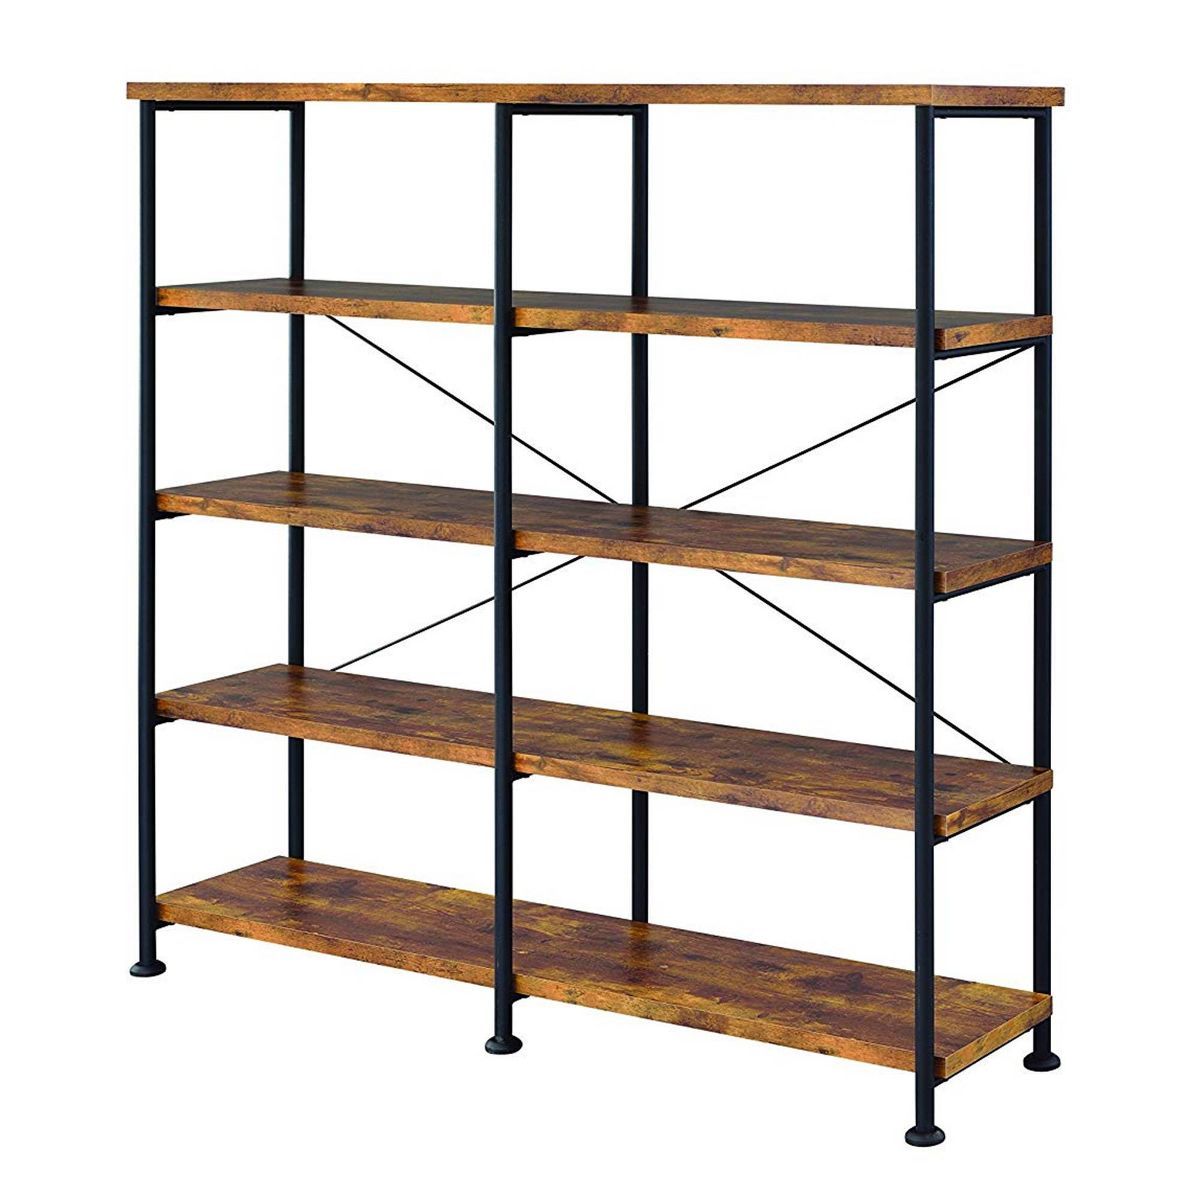 63" Industrial 4 Tier Bookshelf with Particleboard and Metal Frame - Benzara | Target